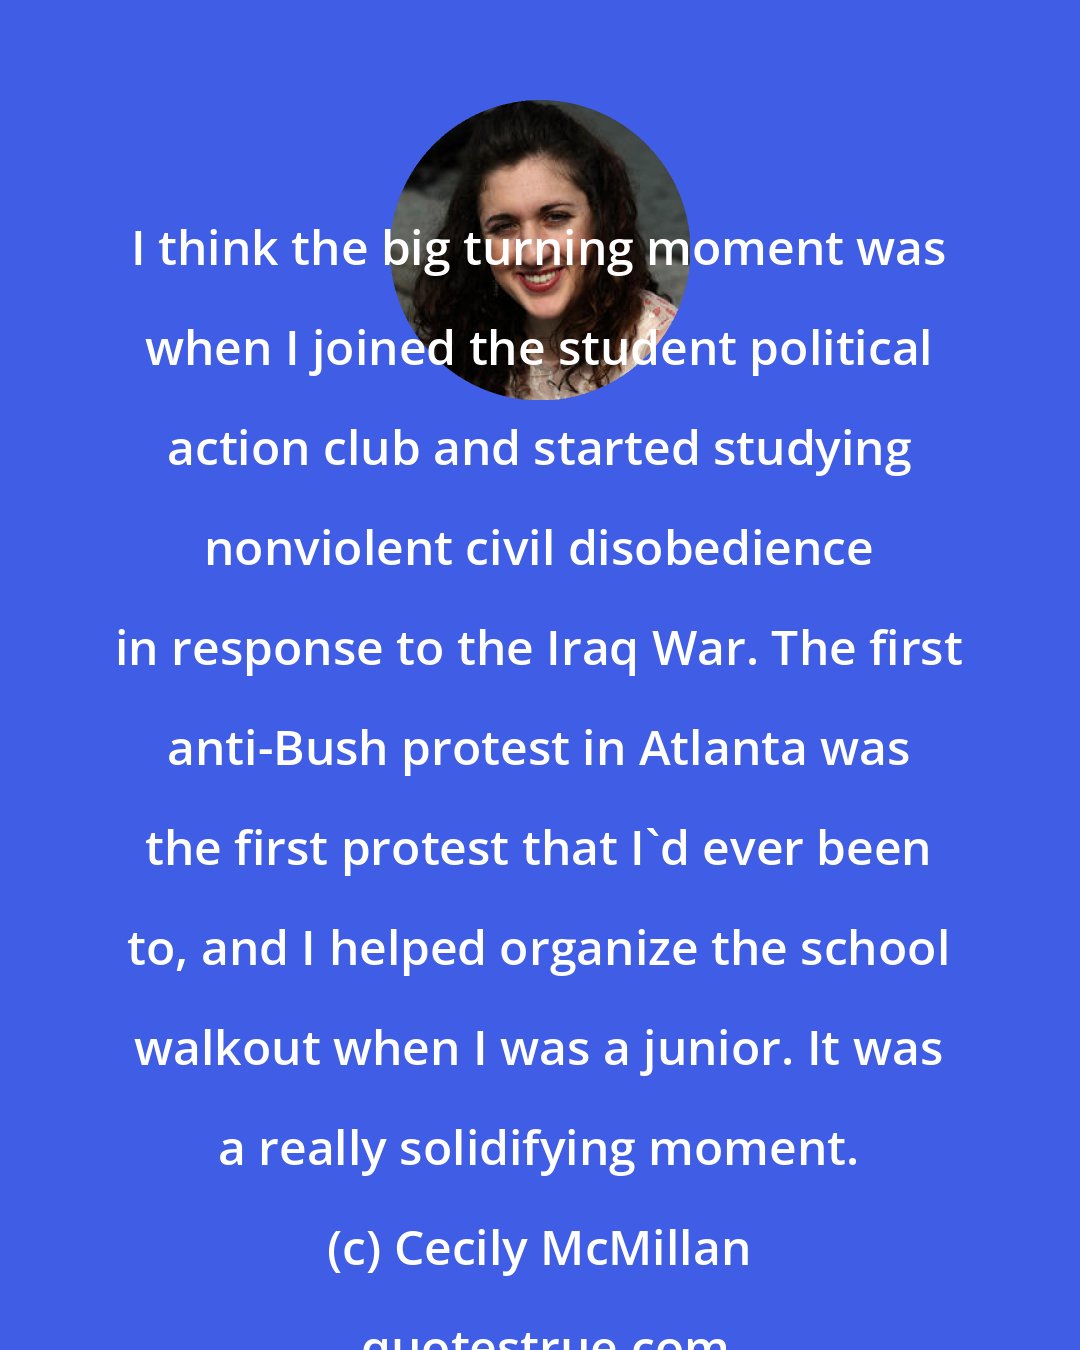 Cecily McMillan: I think the big turning moment was when I joined the student political action club and started studying nonviolent civil disobedience in response to the Iraq War. The first anti-Bush protest in Atlanta was the first protest that I'd ever been to, and I helped organize the school walkout when I was a junior. It was a really solidifying moment.